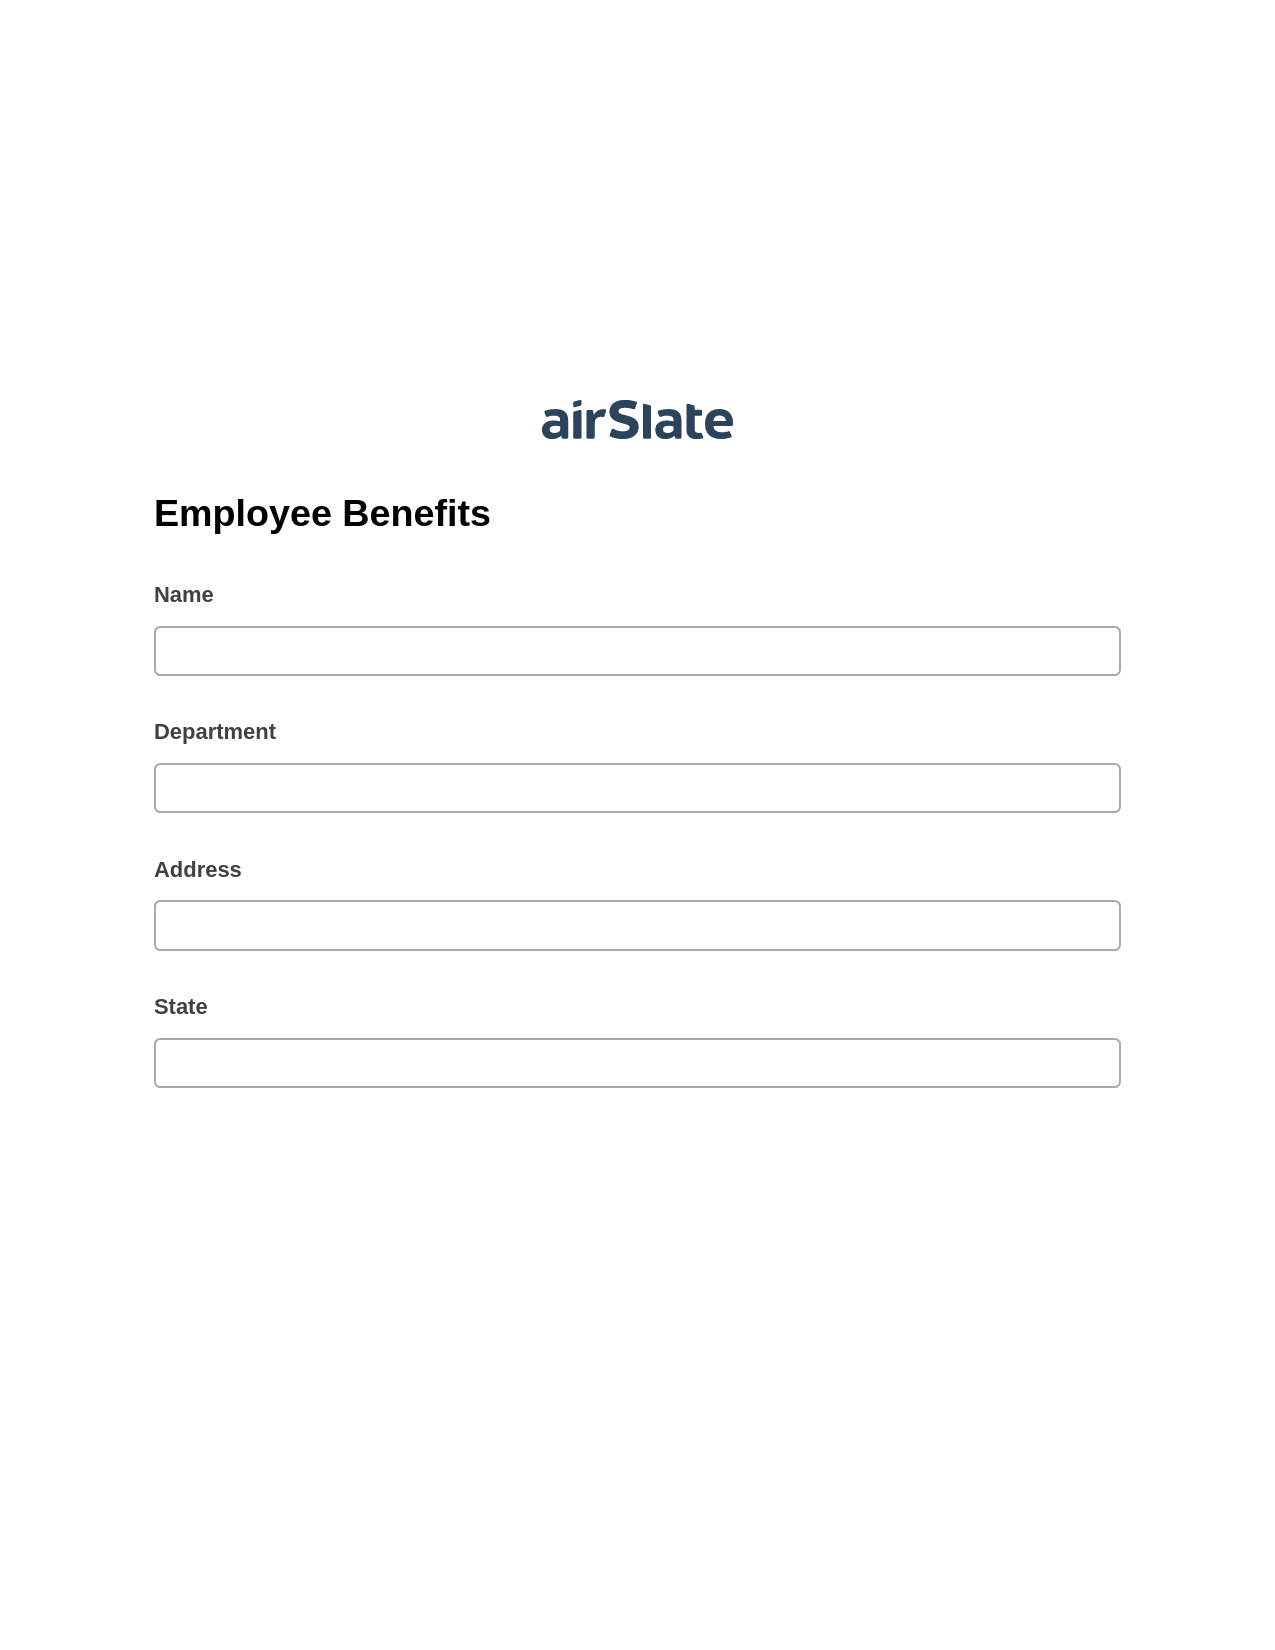 Employee Benefits Pre-fill from Excel Spreadsheet Bot, Invoke Salesforce Process Bot, Export to Formstack Documents Bot